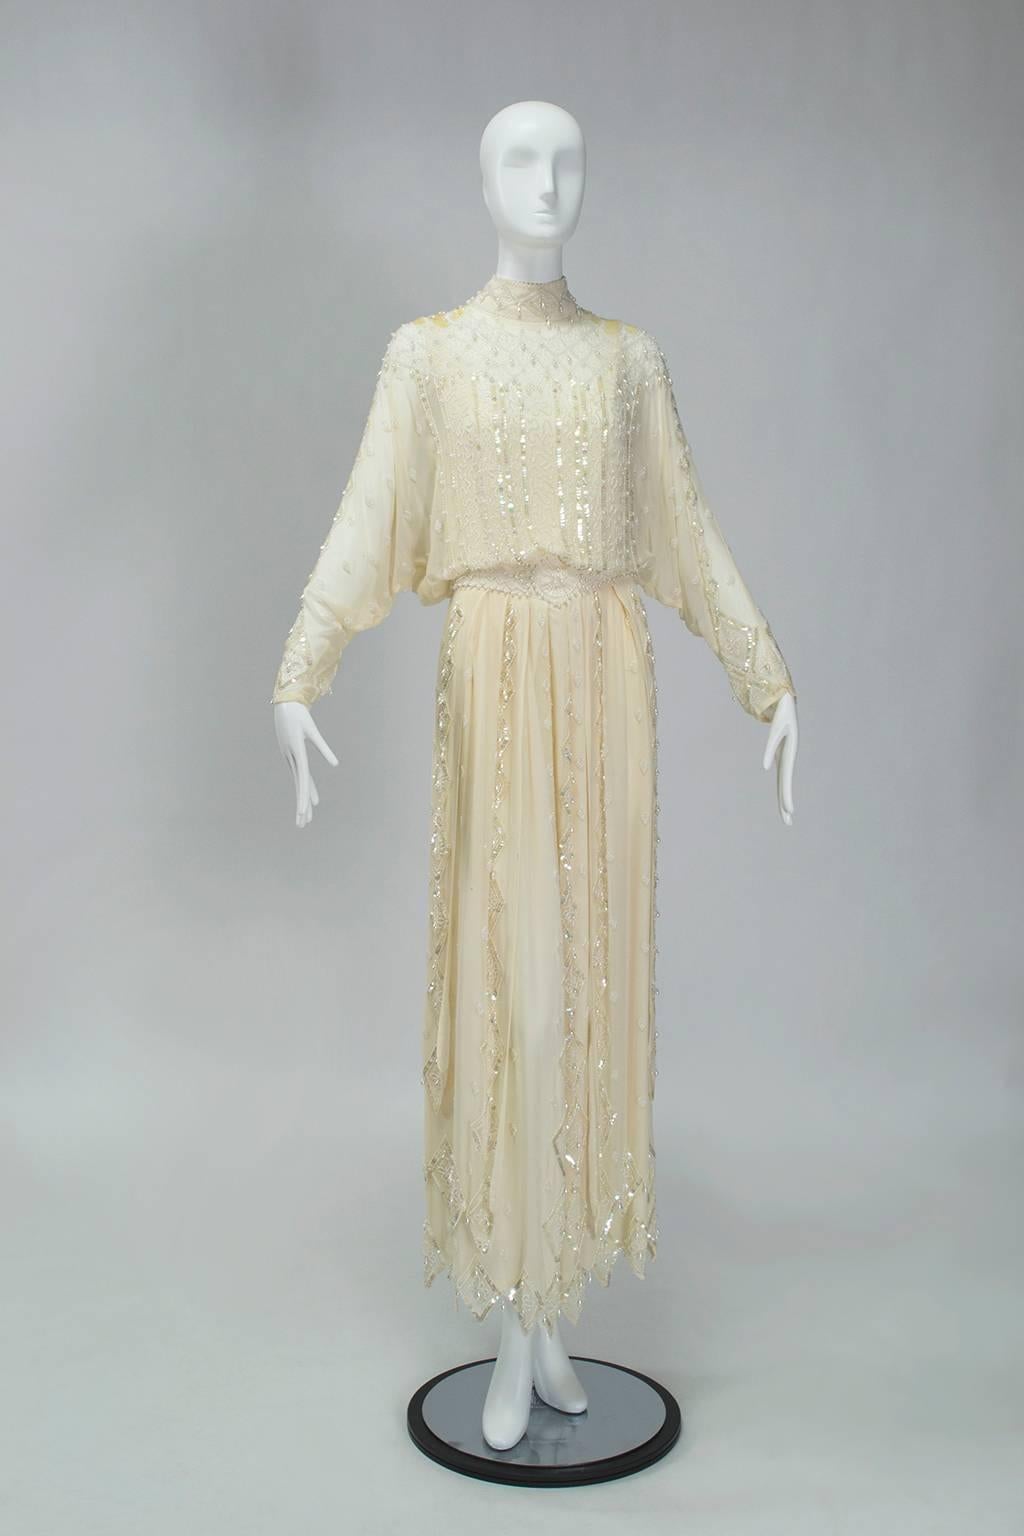 Though produced in the 1980s this gown has all the hallmarks of a turn-of-the-century tea gown, including a layered handkerchief hemline, high neck and opulent ornamentation. A sturdy and wearable (but still dramatic) alternative to an